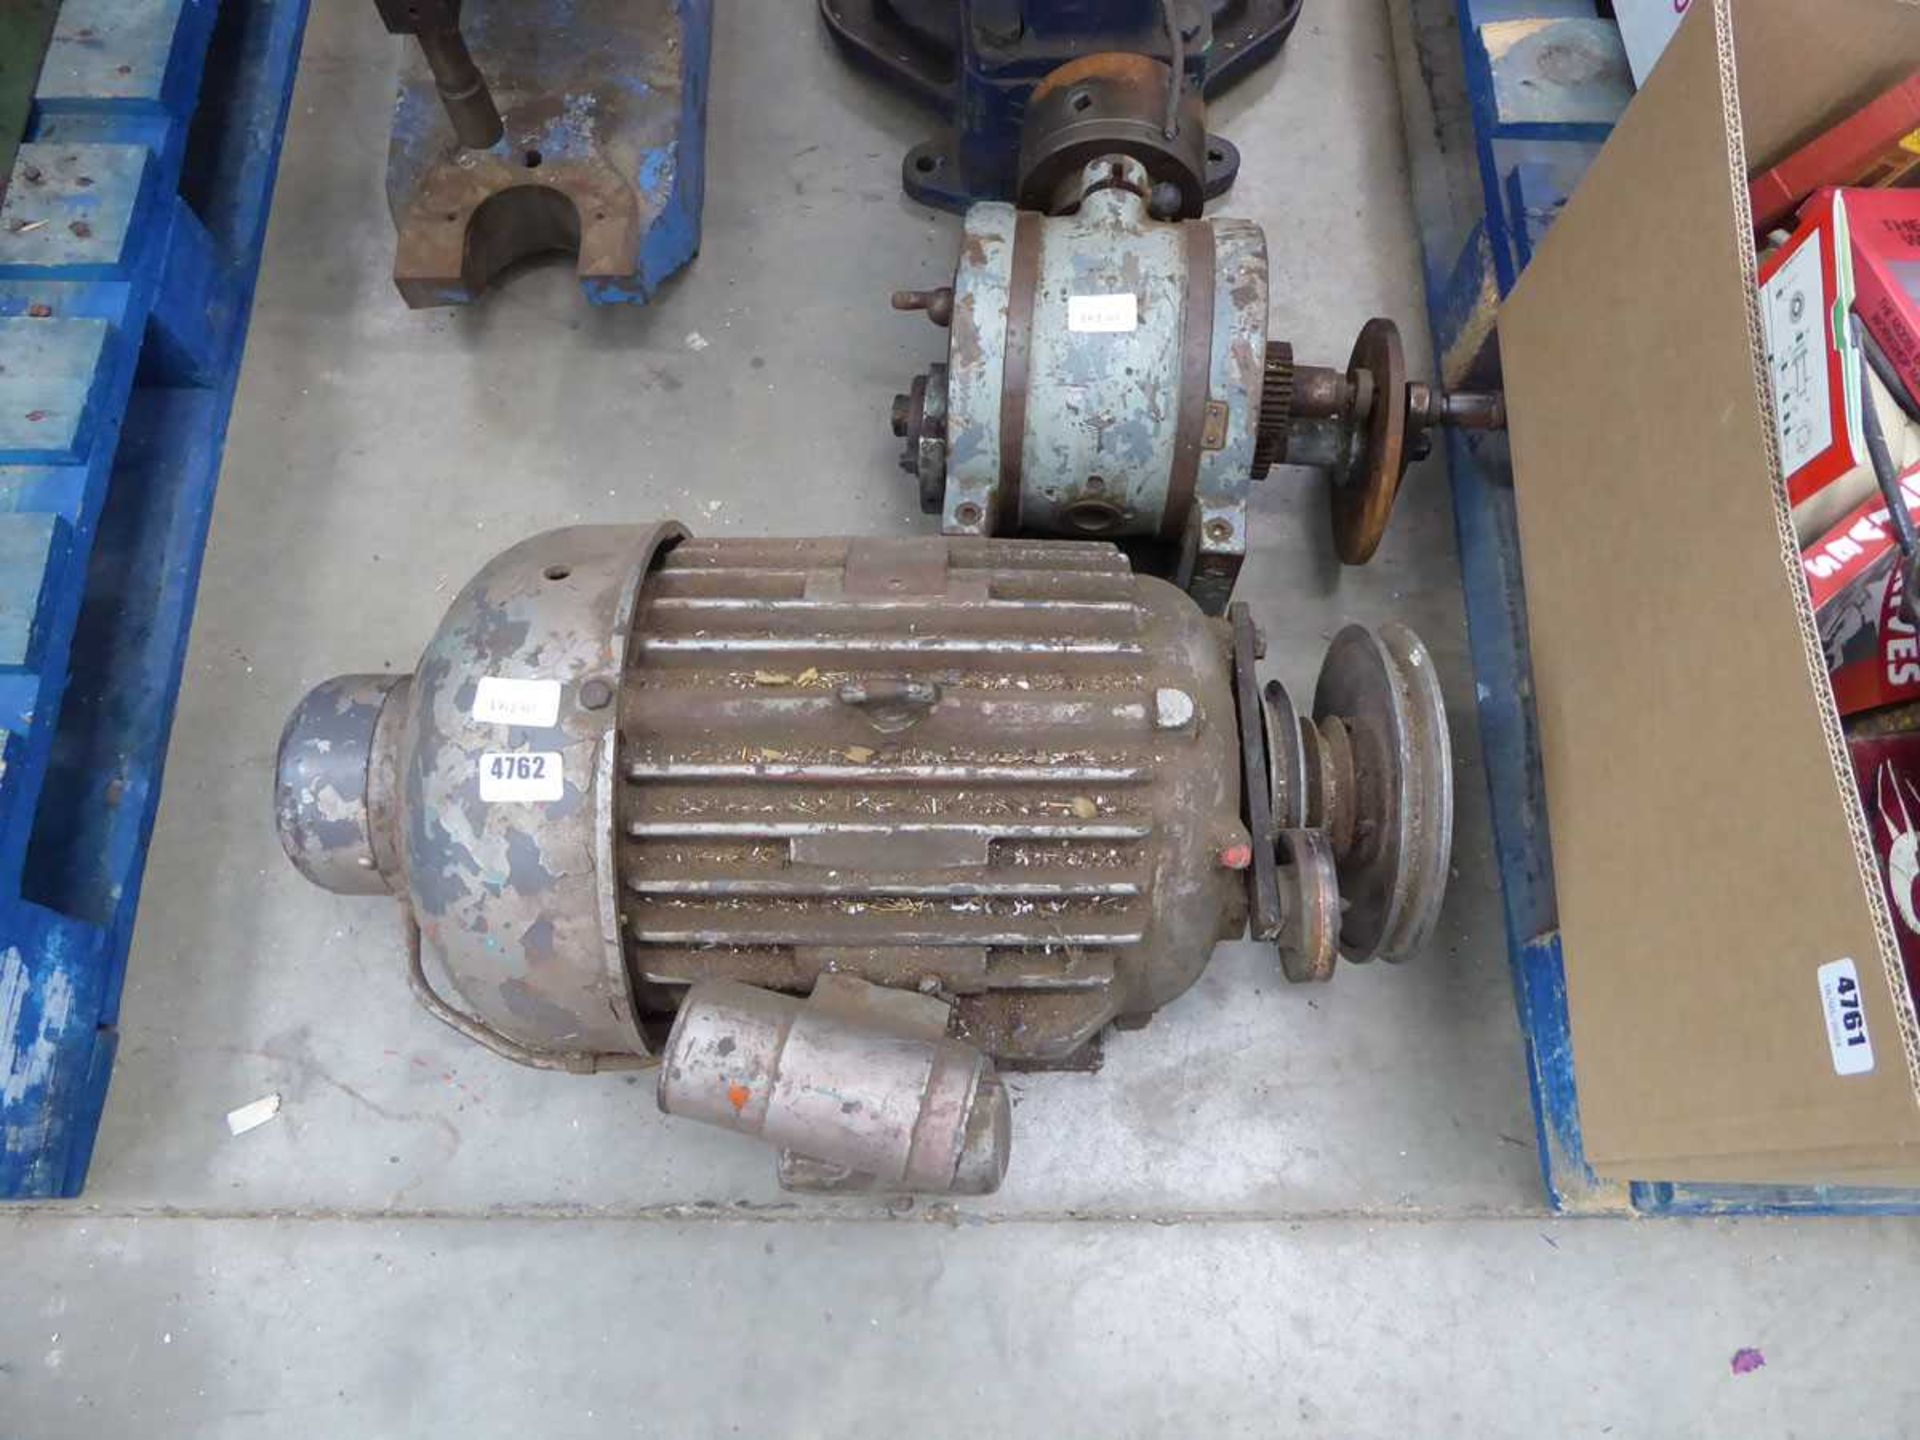 Large electric motor and a dividing head